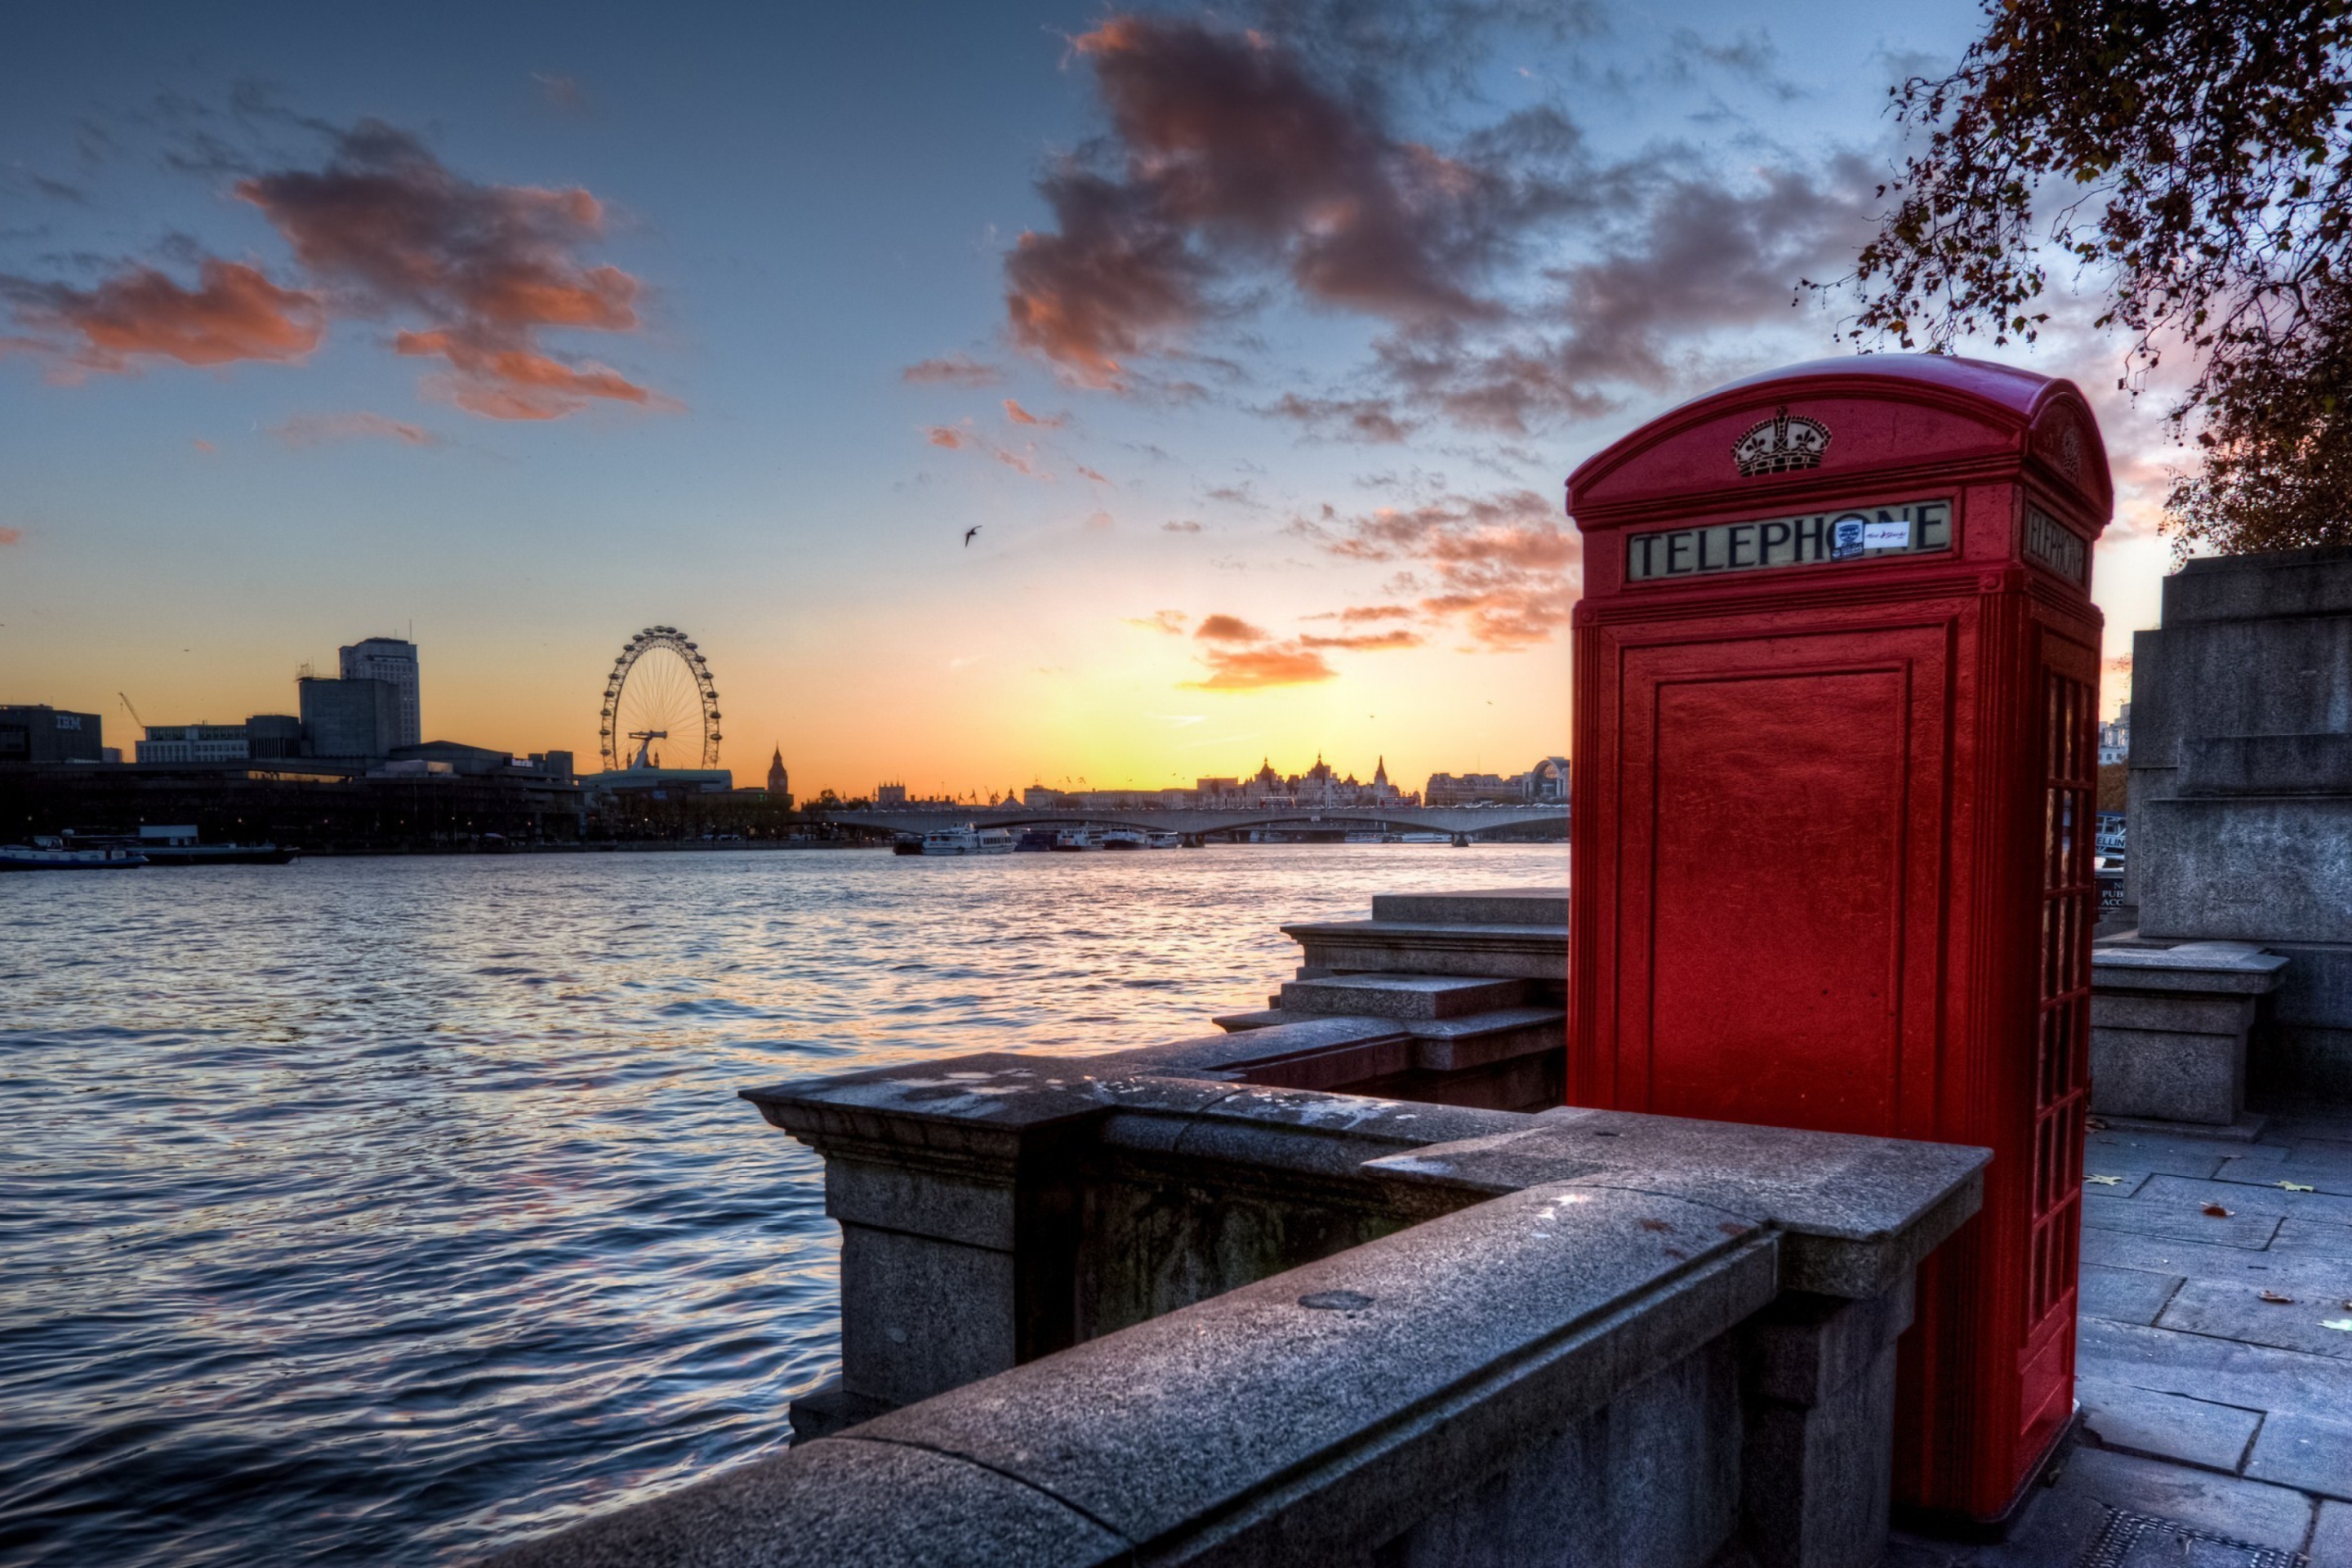 England Phone Booth in London wallpaper 2880x1920